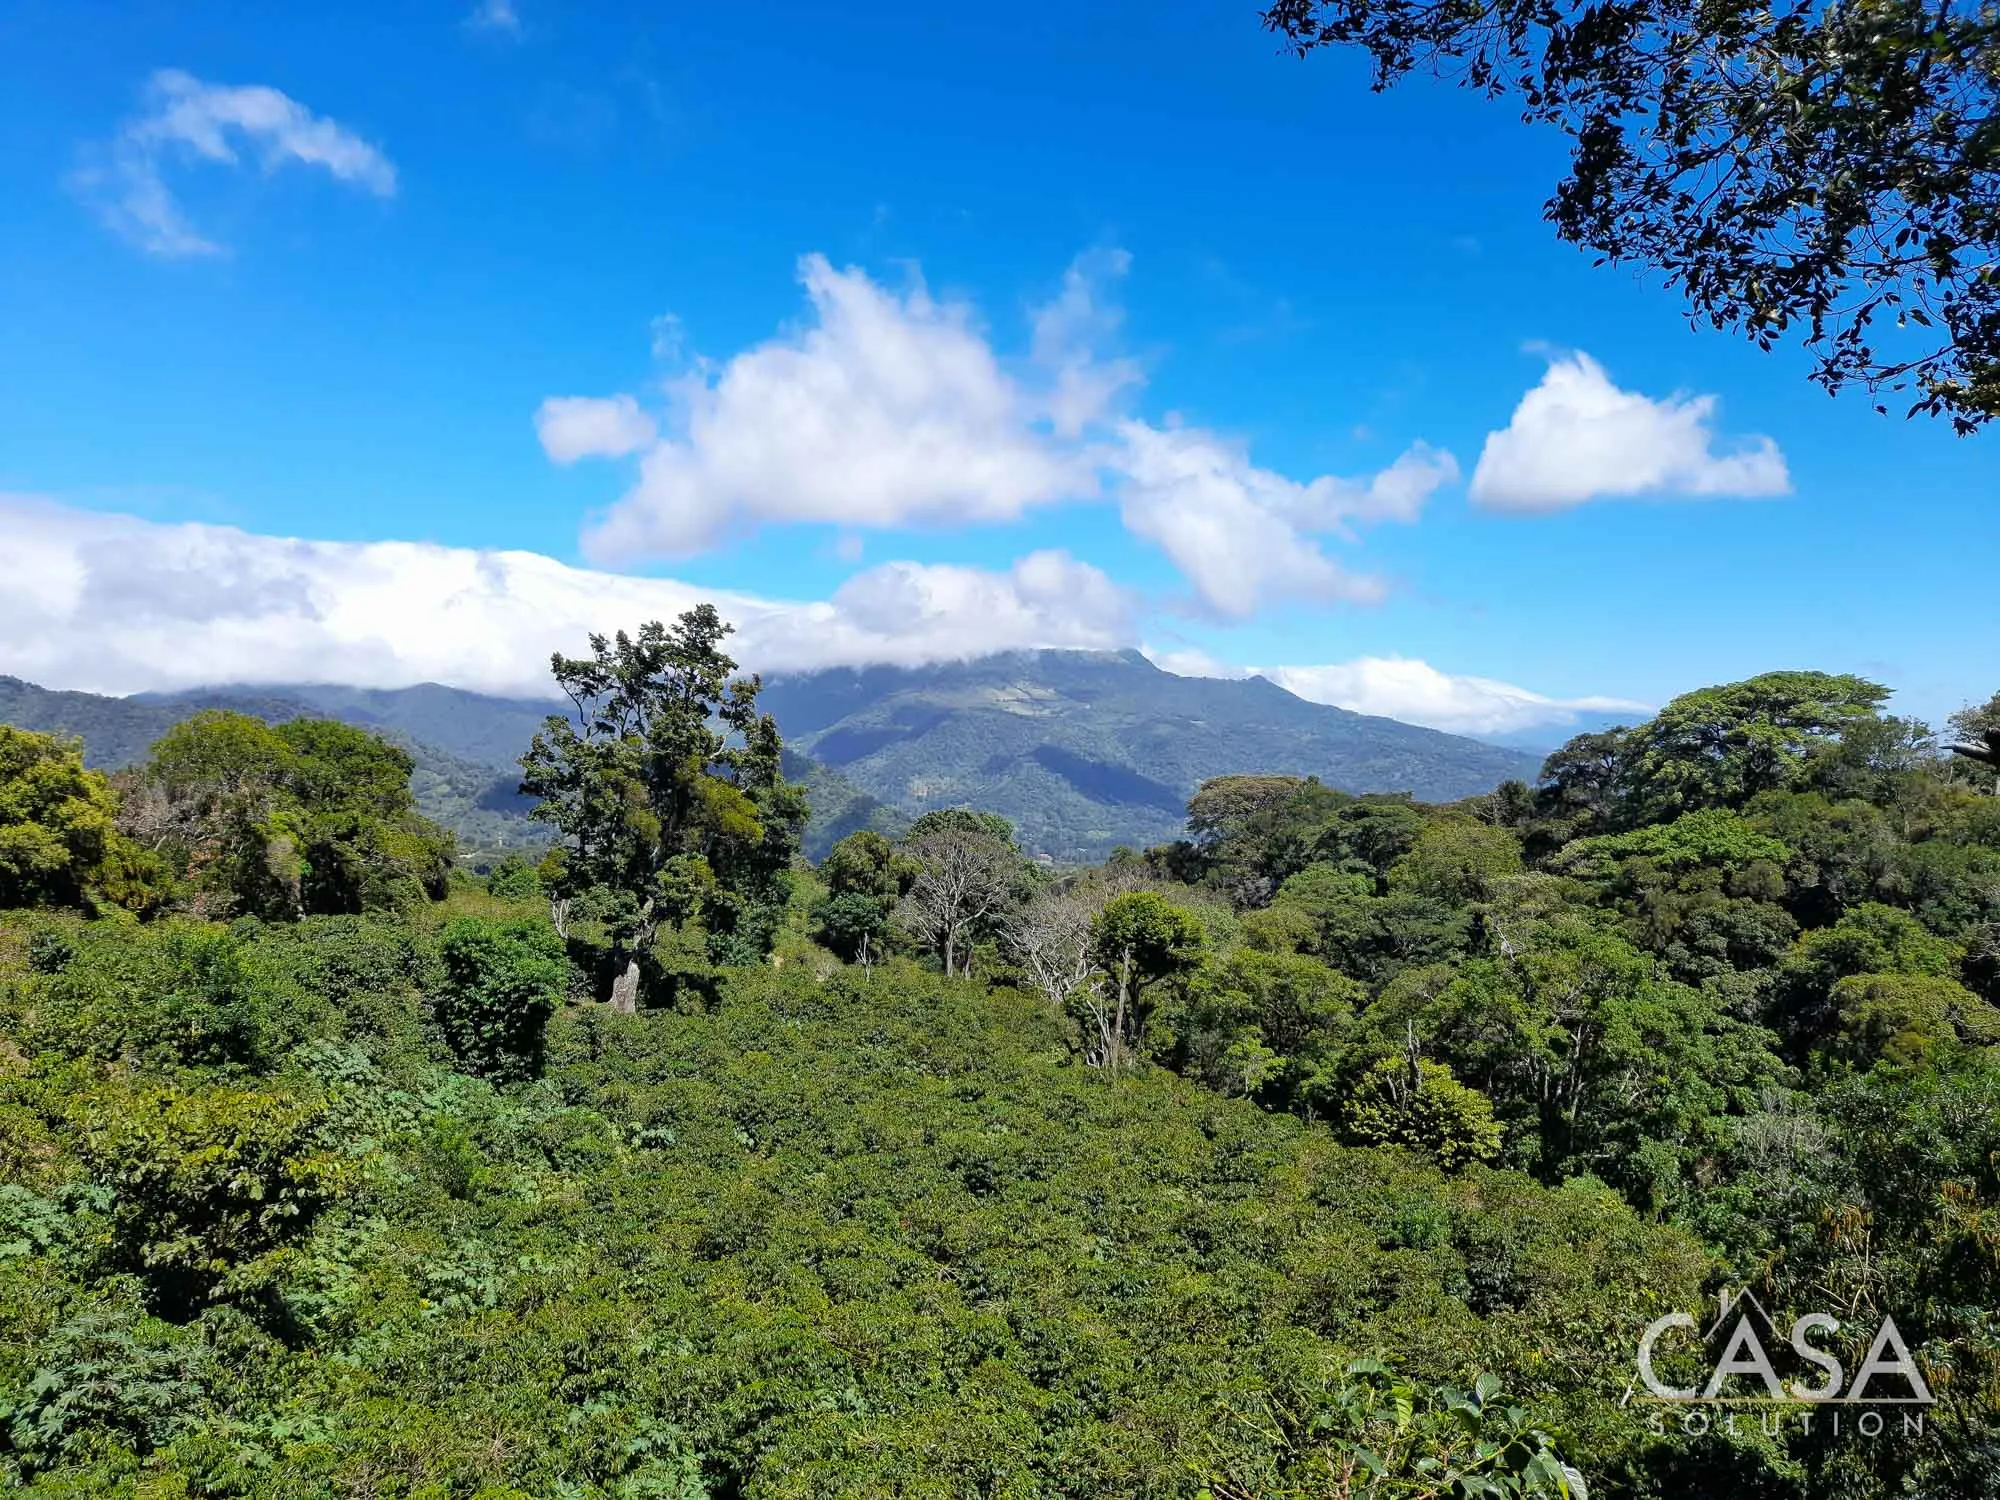 Coffee plantation for sale in Alto Quiel, Bajo Boquete. 7 hectares, 8,258.07 sqm with mountain views and a flat area for building. Ideal for coffee cultivation.